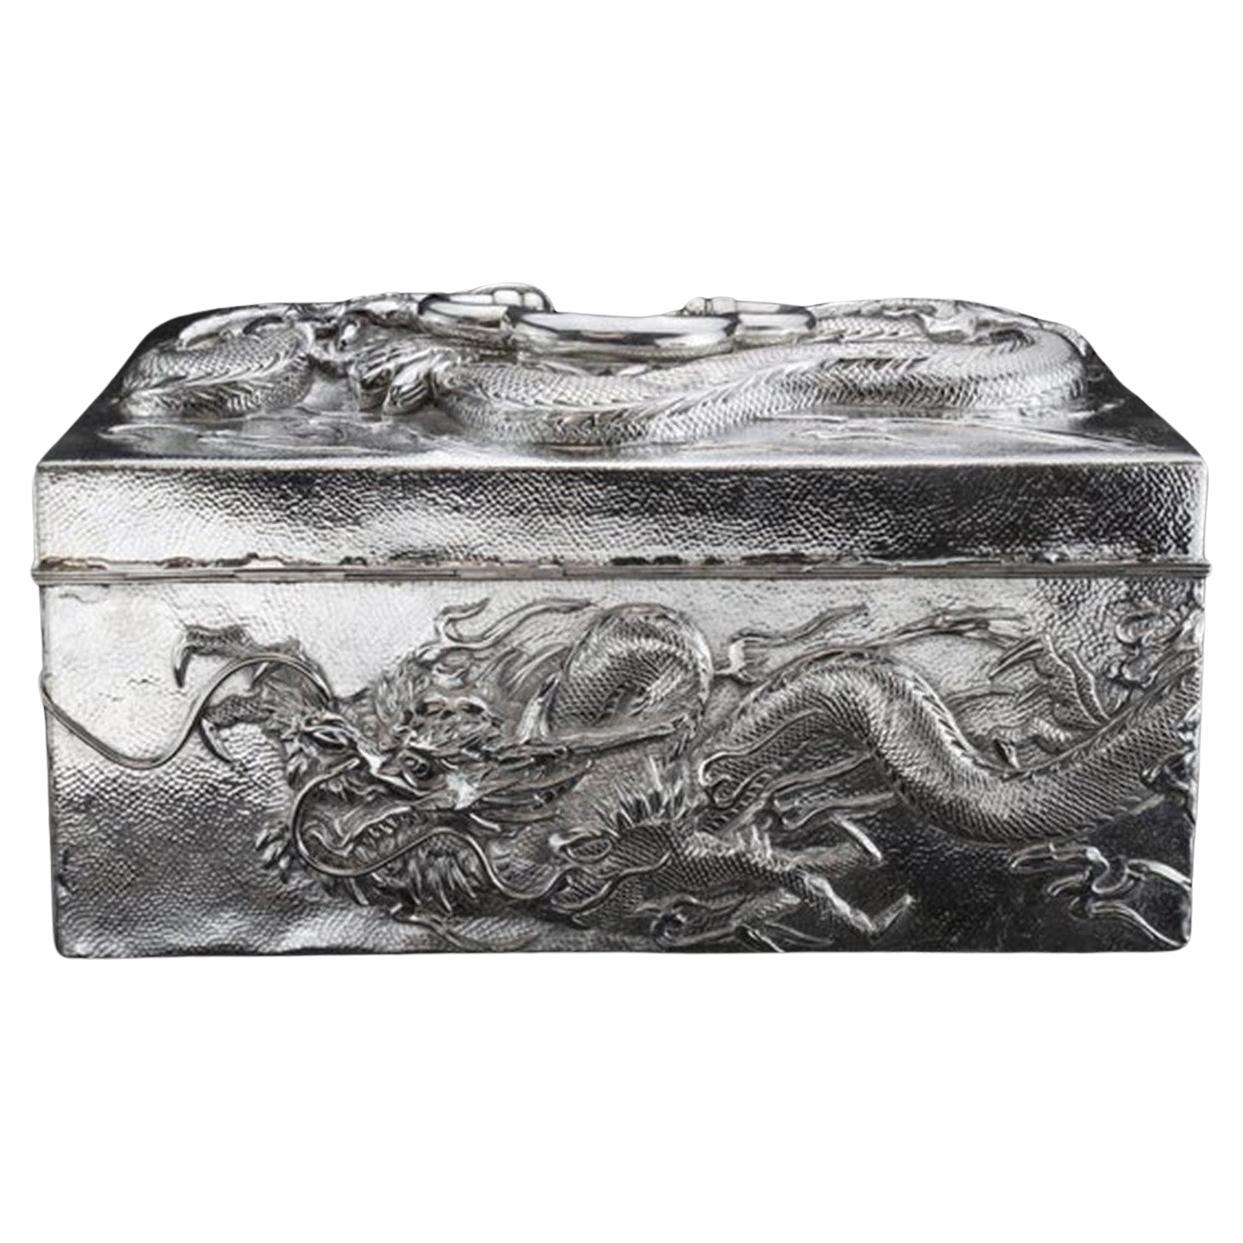 Antique Japanese silver cigar box
Made in Japan, early 20th century, Circa 1900.
Maker (Unidentified) 
Fully hallmarked.

Please note: Interior has been professionally restored.

Dimensions - 
Length 33.7 cm
Depth 23 cm
Height 23 cm
Weight 5272